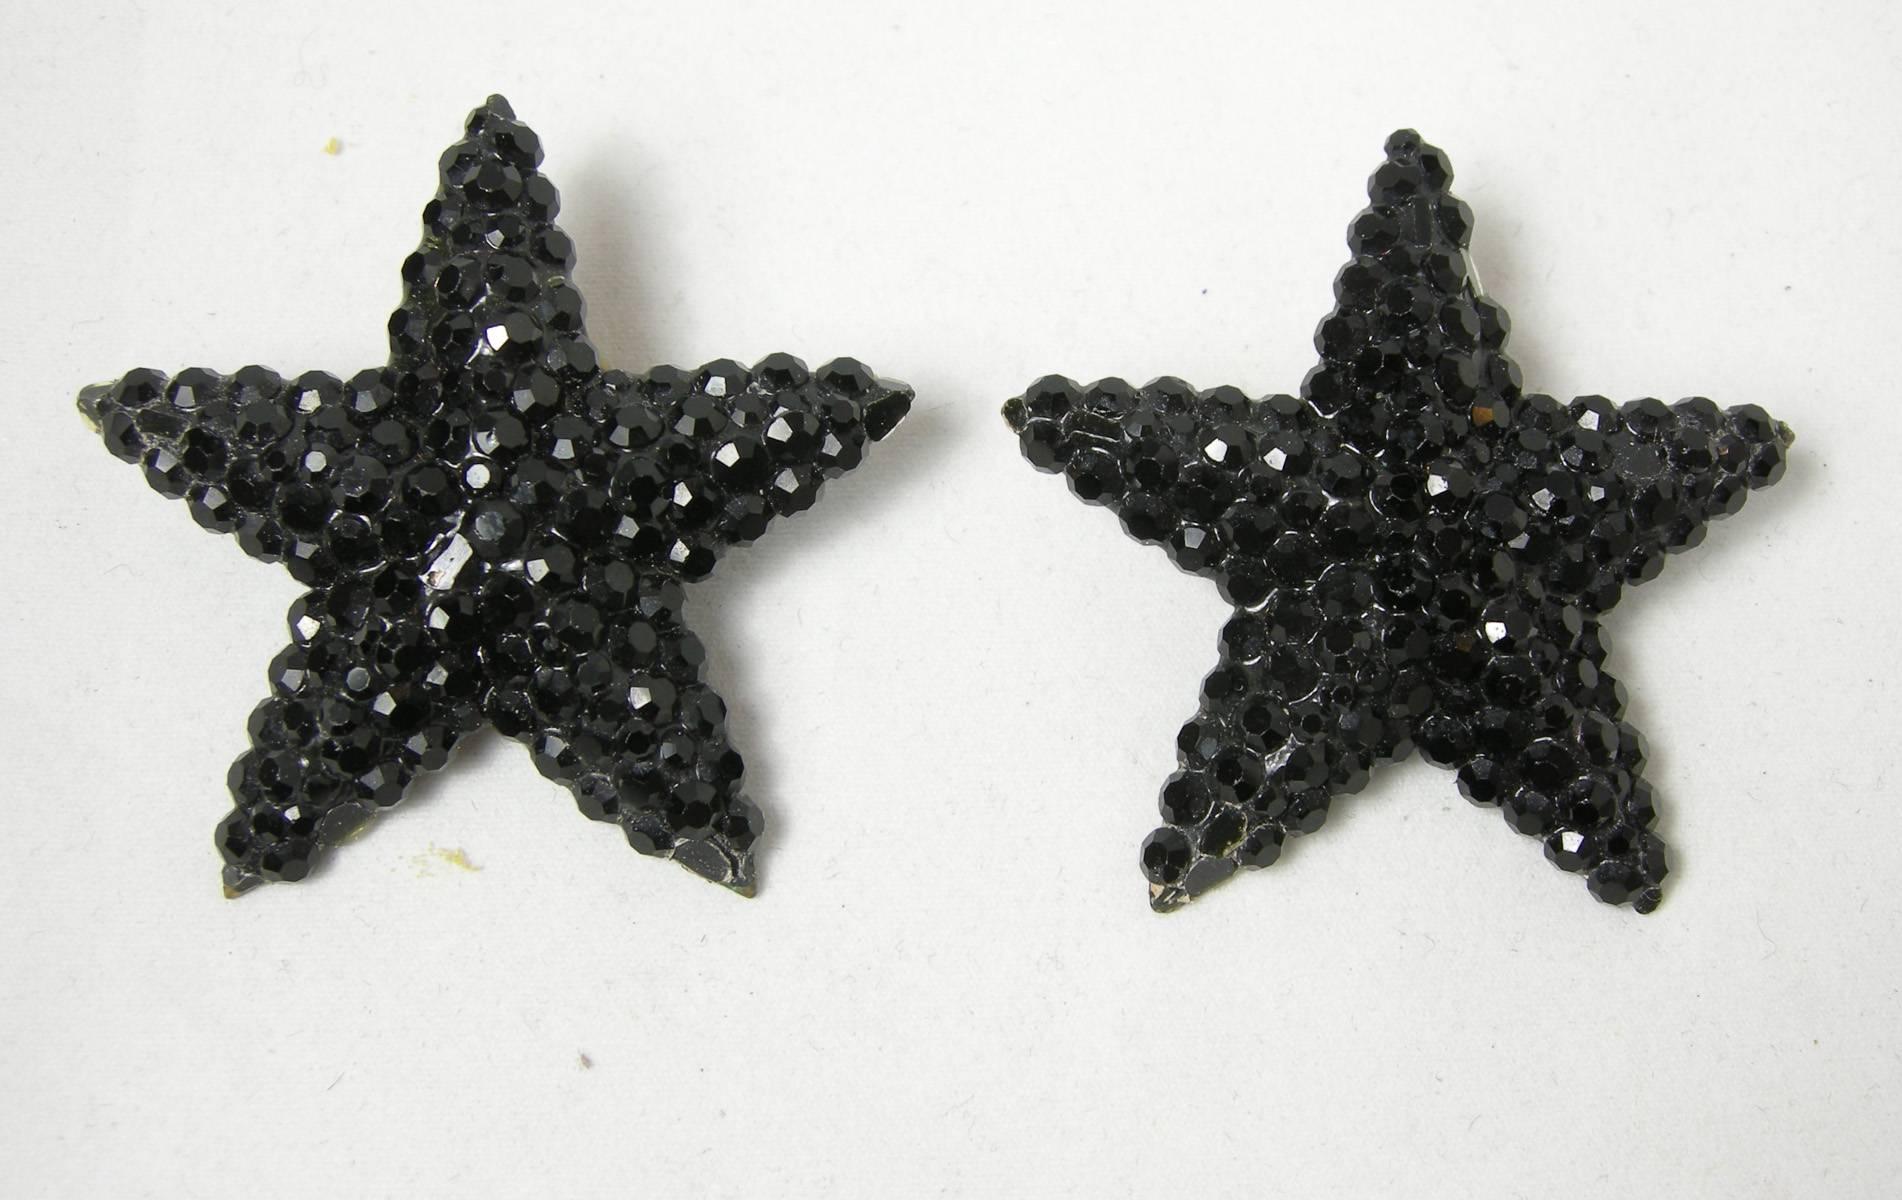 These clip earrings are made by Richard Kerr.  His workmanship is exceptional.  They are black rhinestone in a 5 pointed star design.  They are 2” in diameter.  The back is black enamel with a gold tone clip back.  It is signed “Richard Kerr”. 